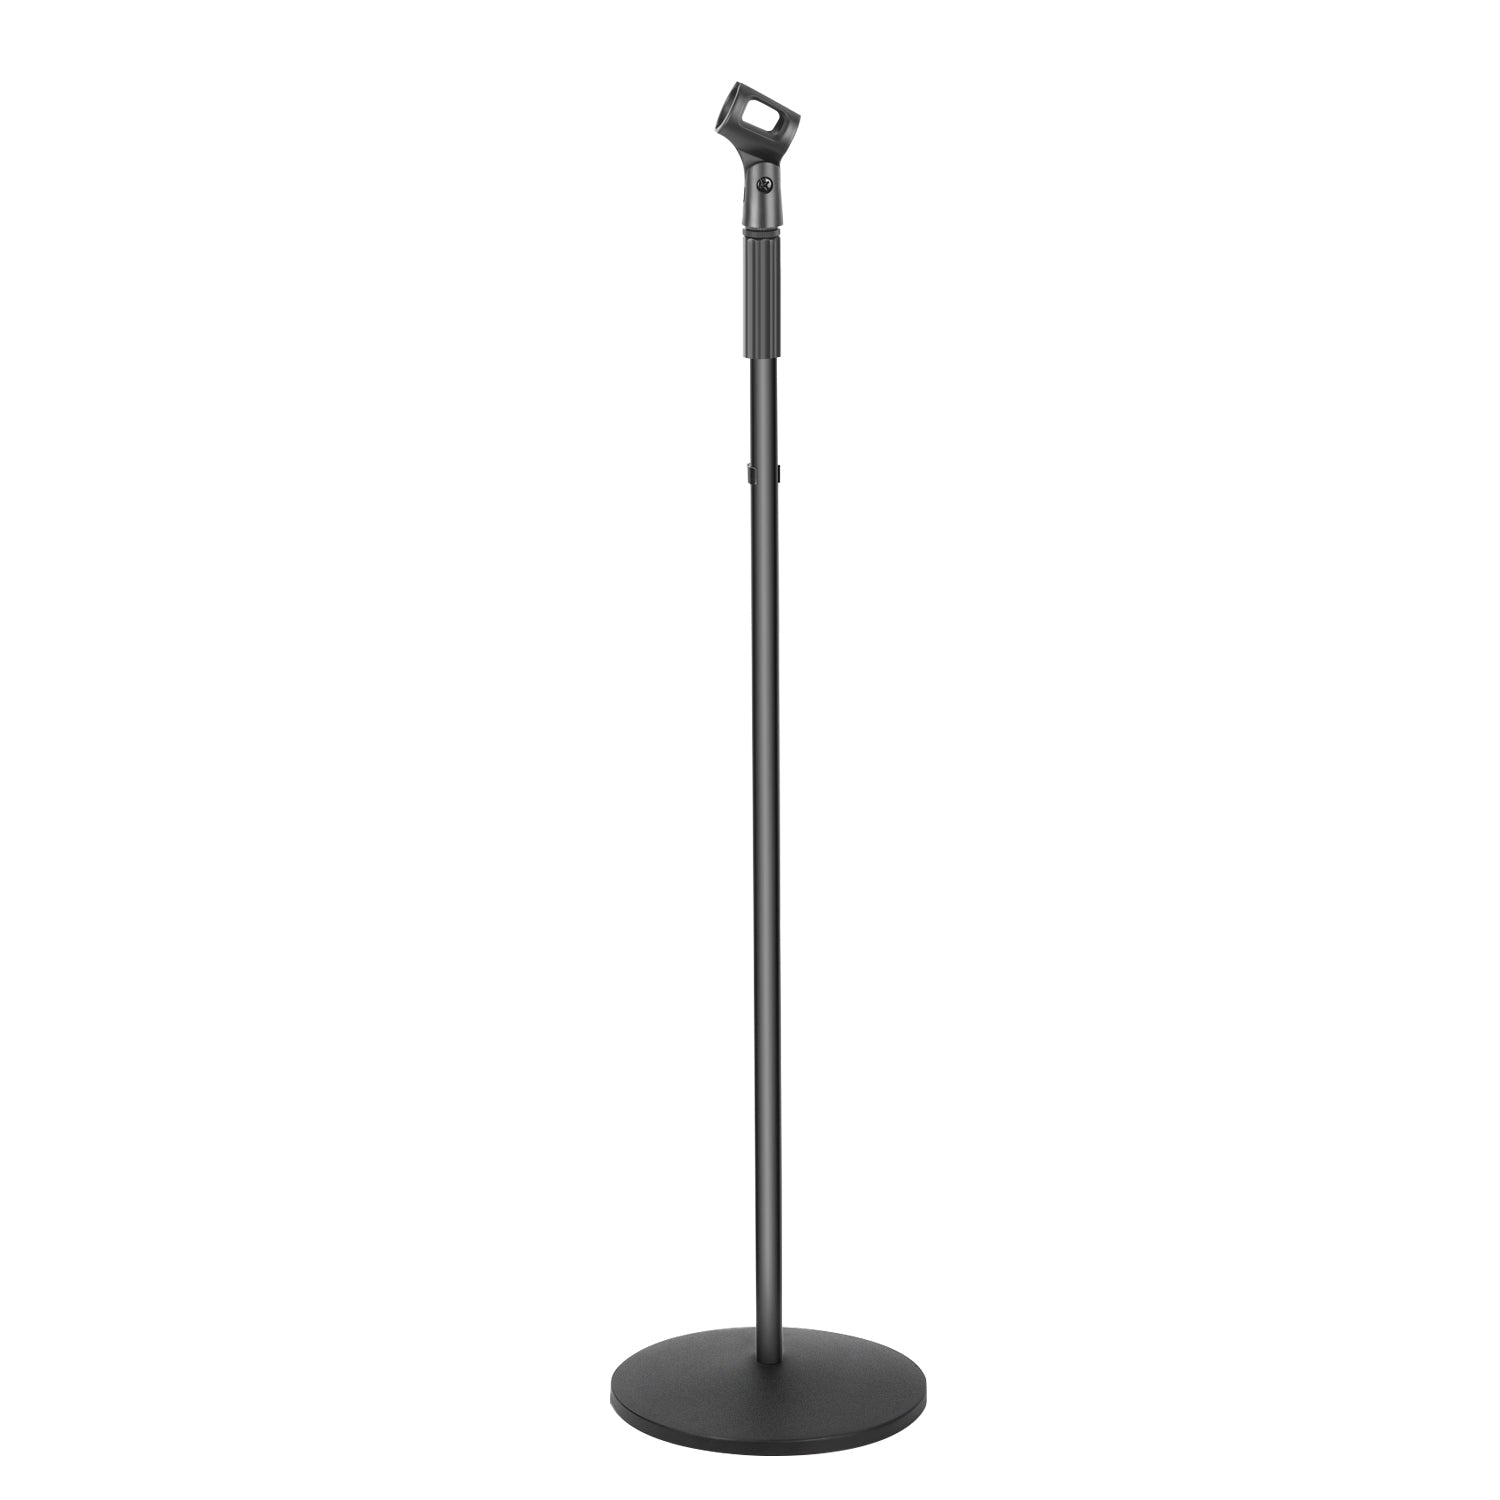 39.9 to 70 inches， Microphone Floor Stand